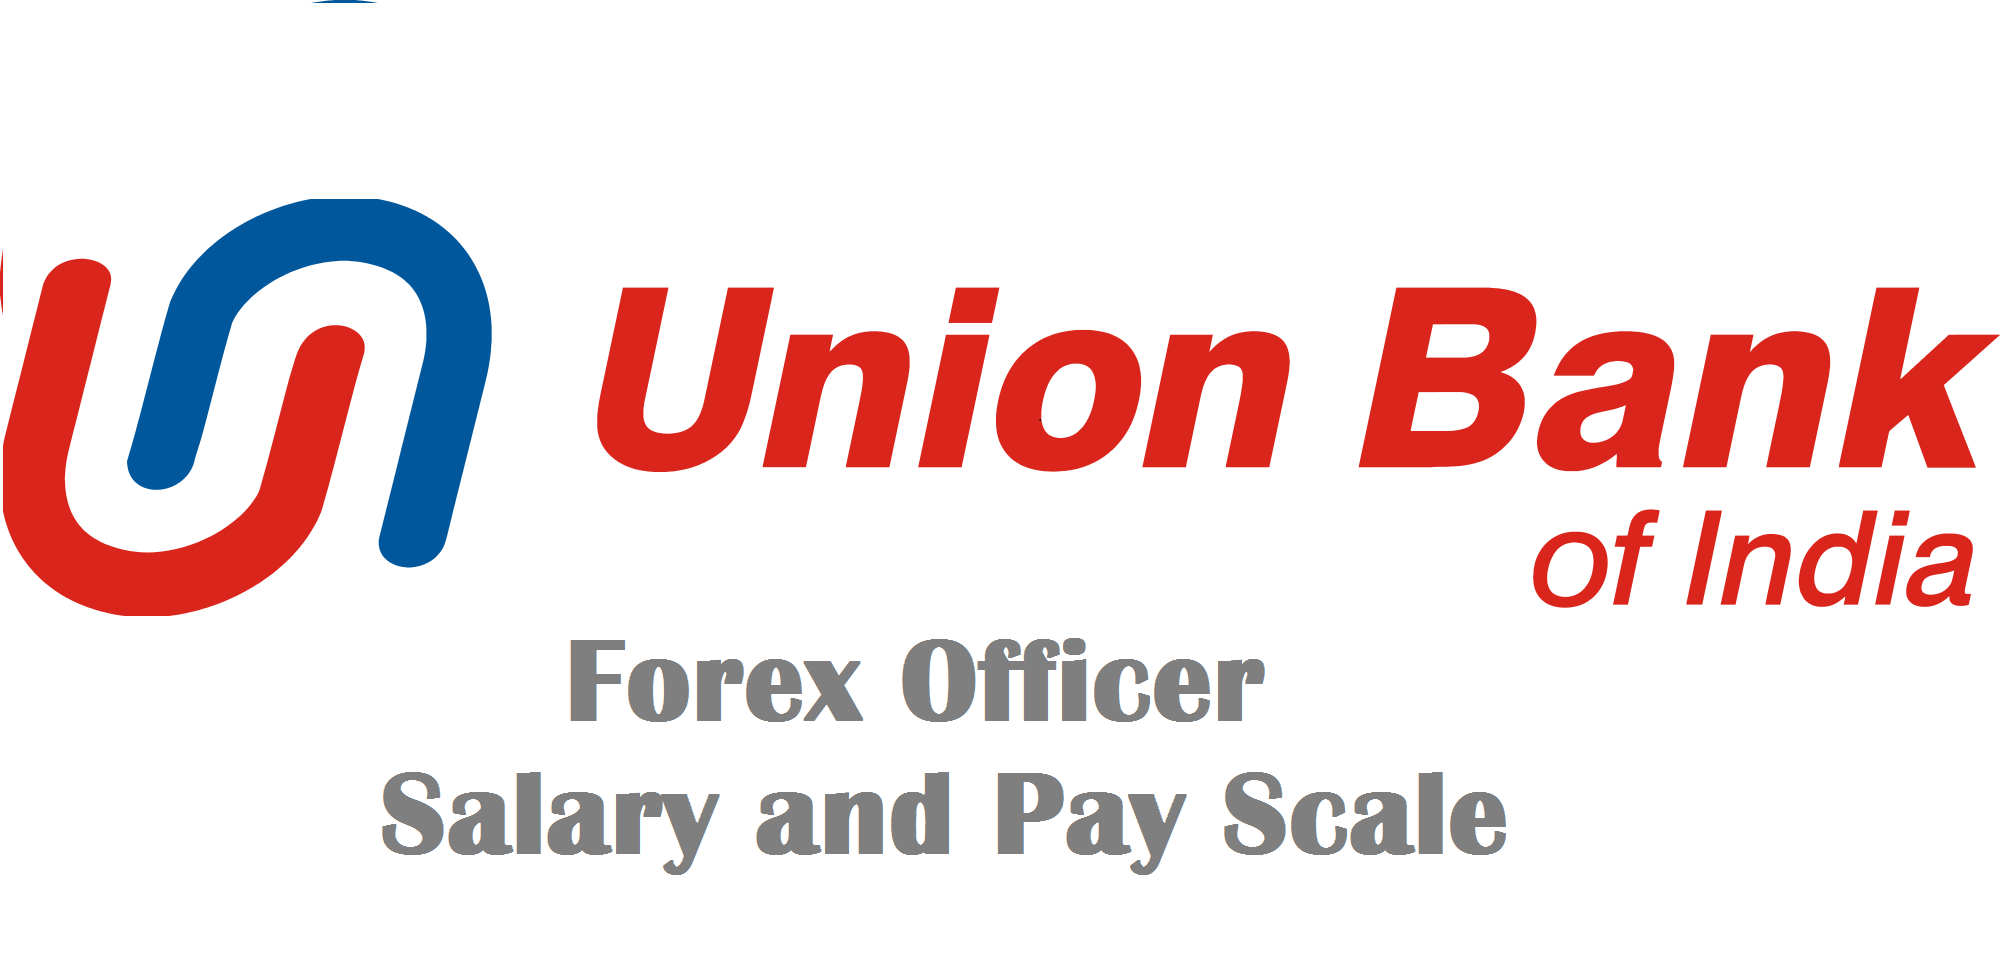 Union Bank Forex Officer Salary and pay scale